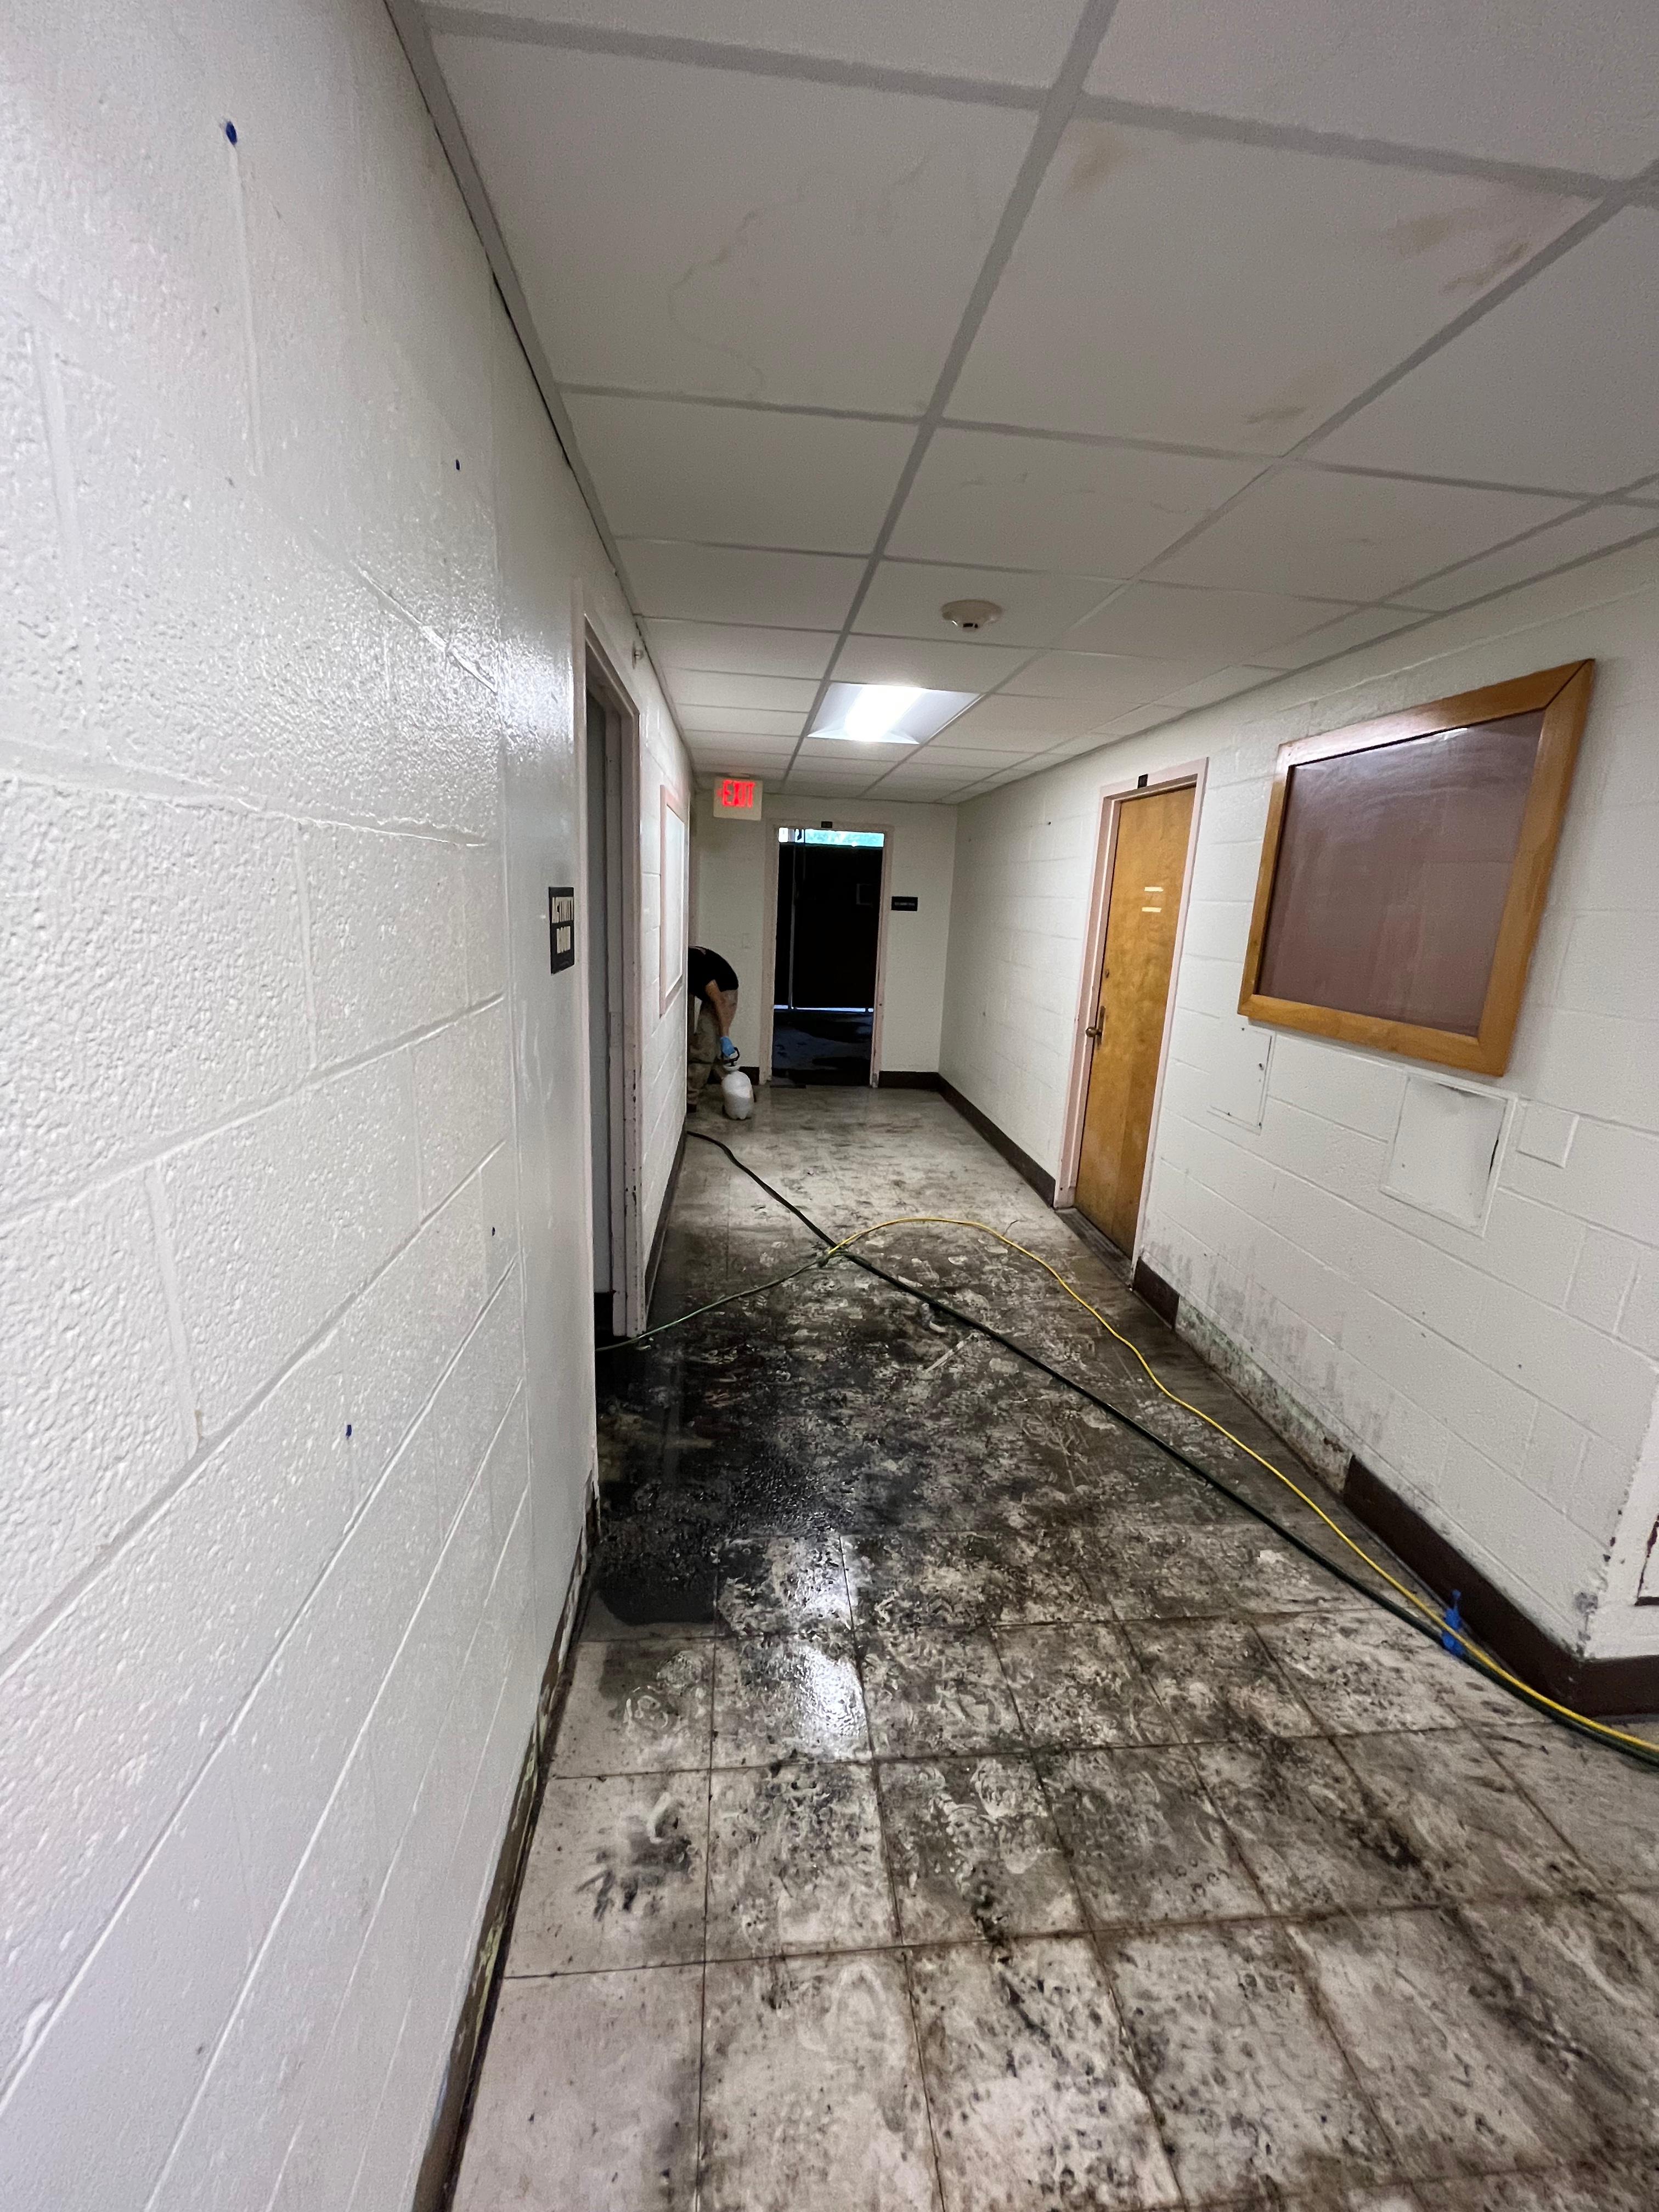 When water damage strikes your business, time is of the essence. That's why SERVPRO of Providence offers 24-hour emergency response for our commercial water loss service. Call us anytime, and our expert team will be there to help!